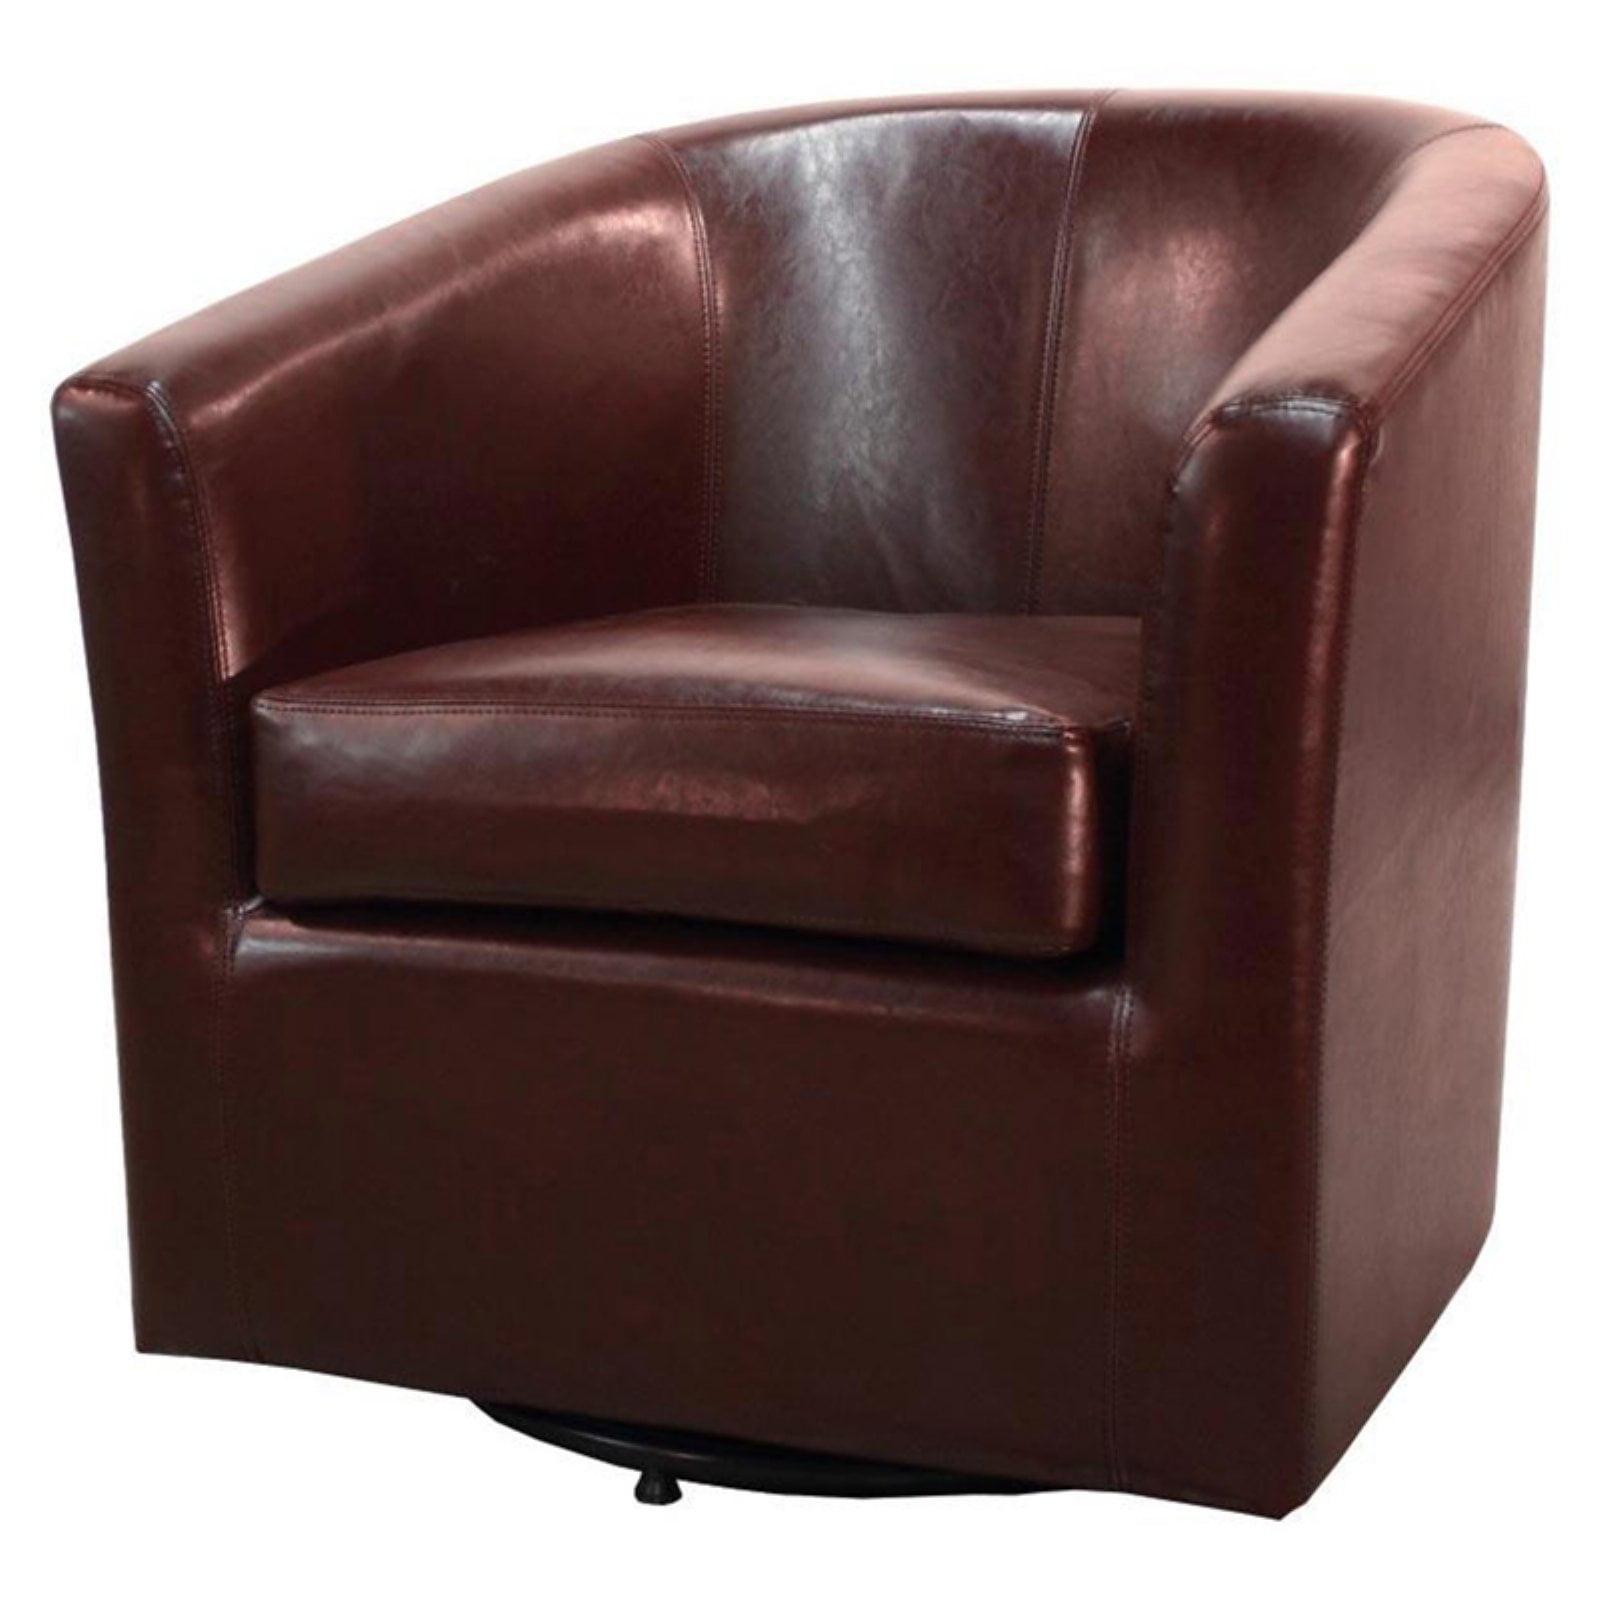 Saddle Brown Handcrafted Leather Swivel Barrel Accent Chair